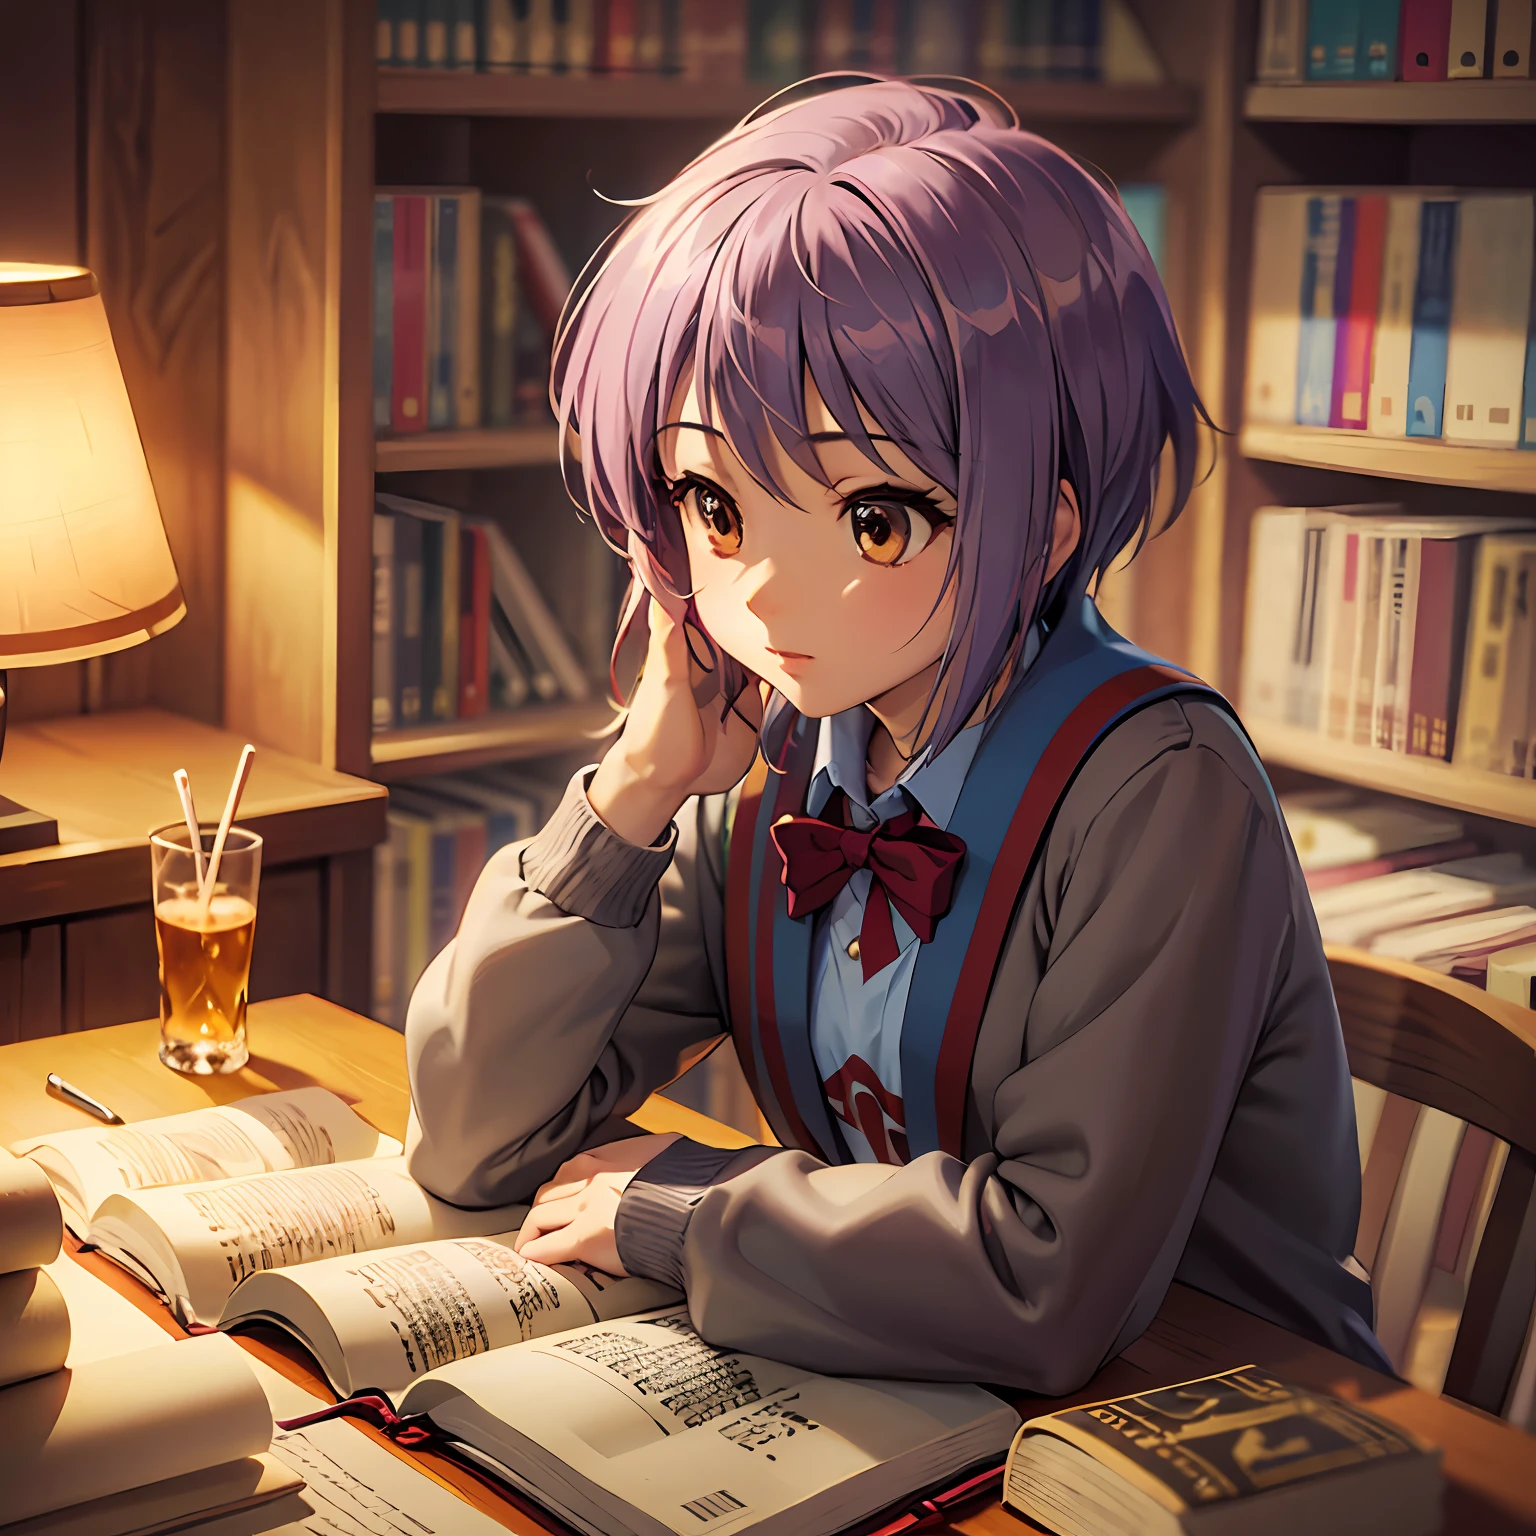 Yuki Nagato, the enigmatic character from "Suzumiya Haruhi no Yuutsu," seems to lead an ordinary, unassuming life on the surface. Her daily activities are veiled in mystery, often unnoticed by her peers. Yet, beneath her reserved exterior, lies a voracious bookworm with a hidden passion for literature.

Every morning, Yuki sets out for school with a quiet demeanor. Her peers see her as a reserved and unremarkable student, never suspecting the depth of knowledge she possesses. As she sits at her desk, her nose buried in a book, her classmates assume she's merely completing her assignments. Little do they know that Yuki's books hold secrets to worlds far beyond the ordinary.

During lunch breaks, Yuki finds solace in the school library, surrounded by the comforting scent of aged pages. She immerses herself in books of every genre, from classic literature to obscure scientific journals. Reading is her gateway to endless possibilities, where imagination knows no bounds.

As the afternoon classes drone on, Yuki's mind often drifts to the worlds she has explored within the pages of her books. Her eyes may be focused on the chalkboard, but her thoughts are always a universe away. In the realm of her mind, she conjures up adventures, unraveling mysteries, and delving into the depths of human emotions.

After school, Yuki slips away to a quiet corner of the library, away from the bustling crowds. Here, she finds comfort and solace among the rows of books that line the shelves. In the world of literature, she finds companionship and understanding, a refuge from the complexities of reality.

Once the evening descends, Yuki returns to her home, where her room is adorned with shelves overflowing with books. This space is her sanctuary, where she can delve into stories until the late hours of the night. The soft glow of a lamp casts a warm aura, and she loses herself in the adventures of characters she's come to know as friends.